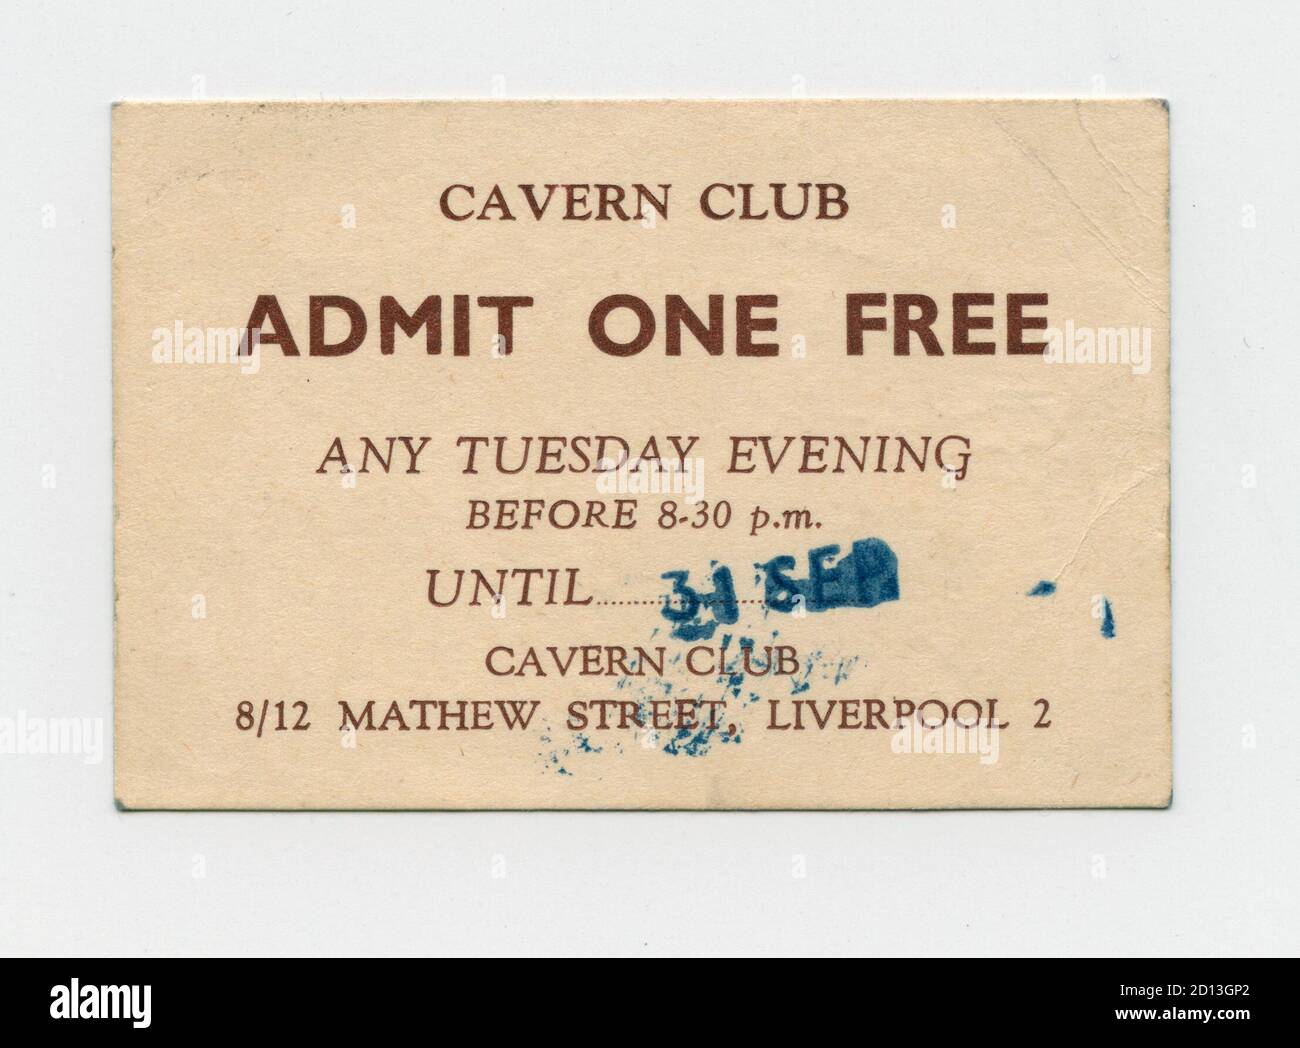 Vintage free entry ticket to the original Cavern Club on Mathew Street in Liverpool dated September 1965 with the text Admit One Free any Tuesday evening before 8:30 p.m. Stock Photo